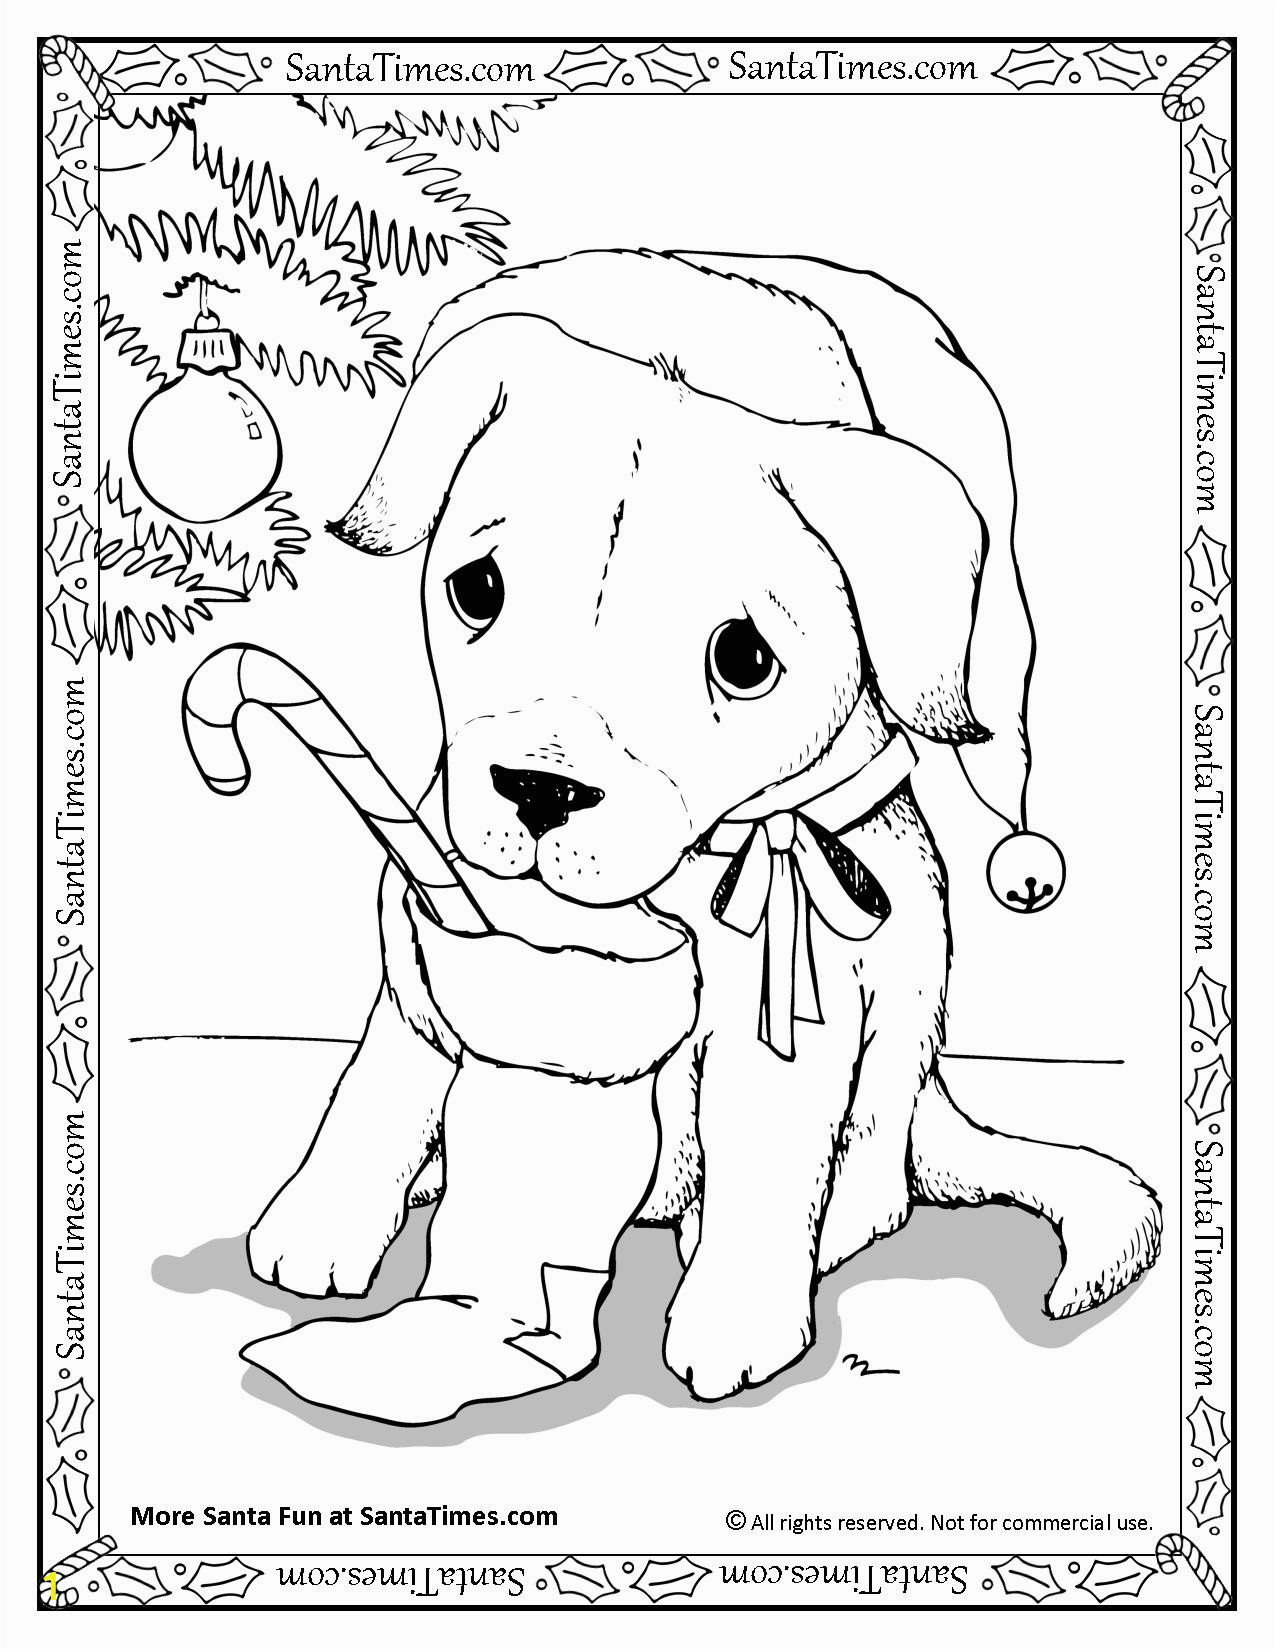 8aac87bca644af63dbe47e458fdd1386 santa puppy coloring page 1275 1650